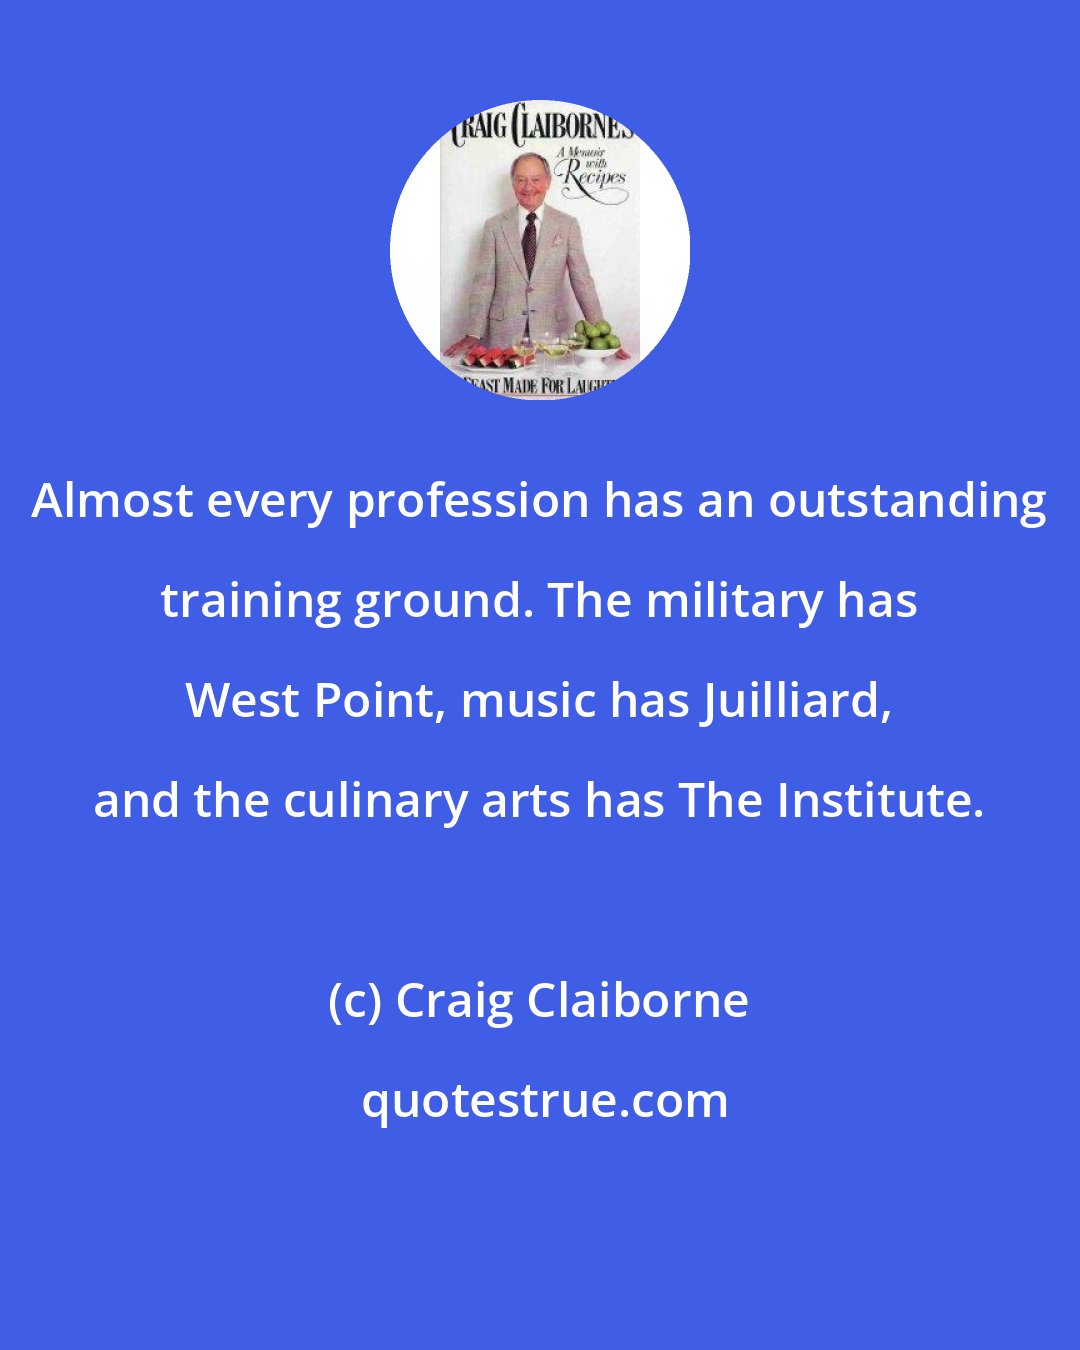 Craig Claiborne: Almost every profession has an outstanding training ground. The military has West Point, music has Juilliard, and the culinary arts has The Institute.